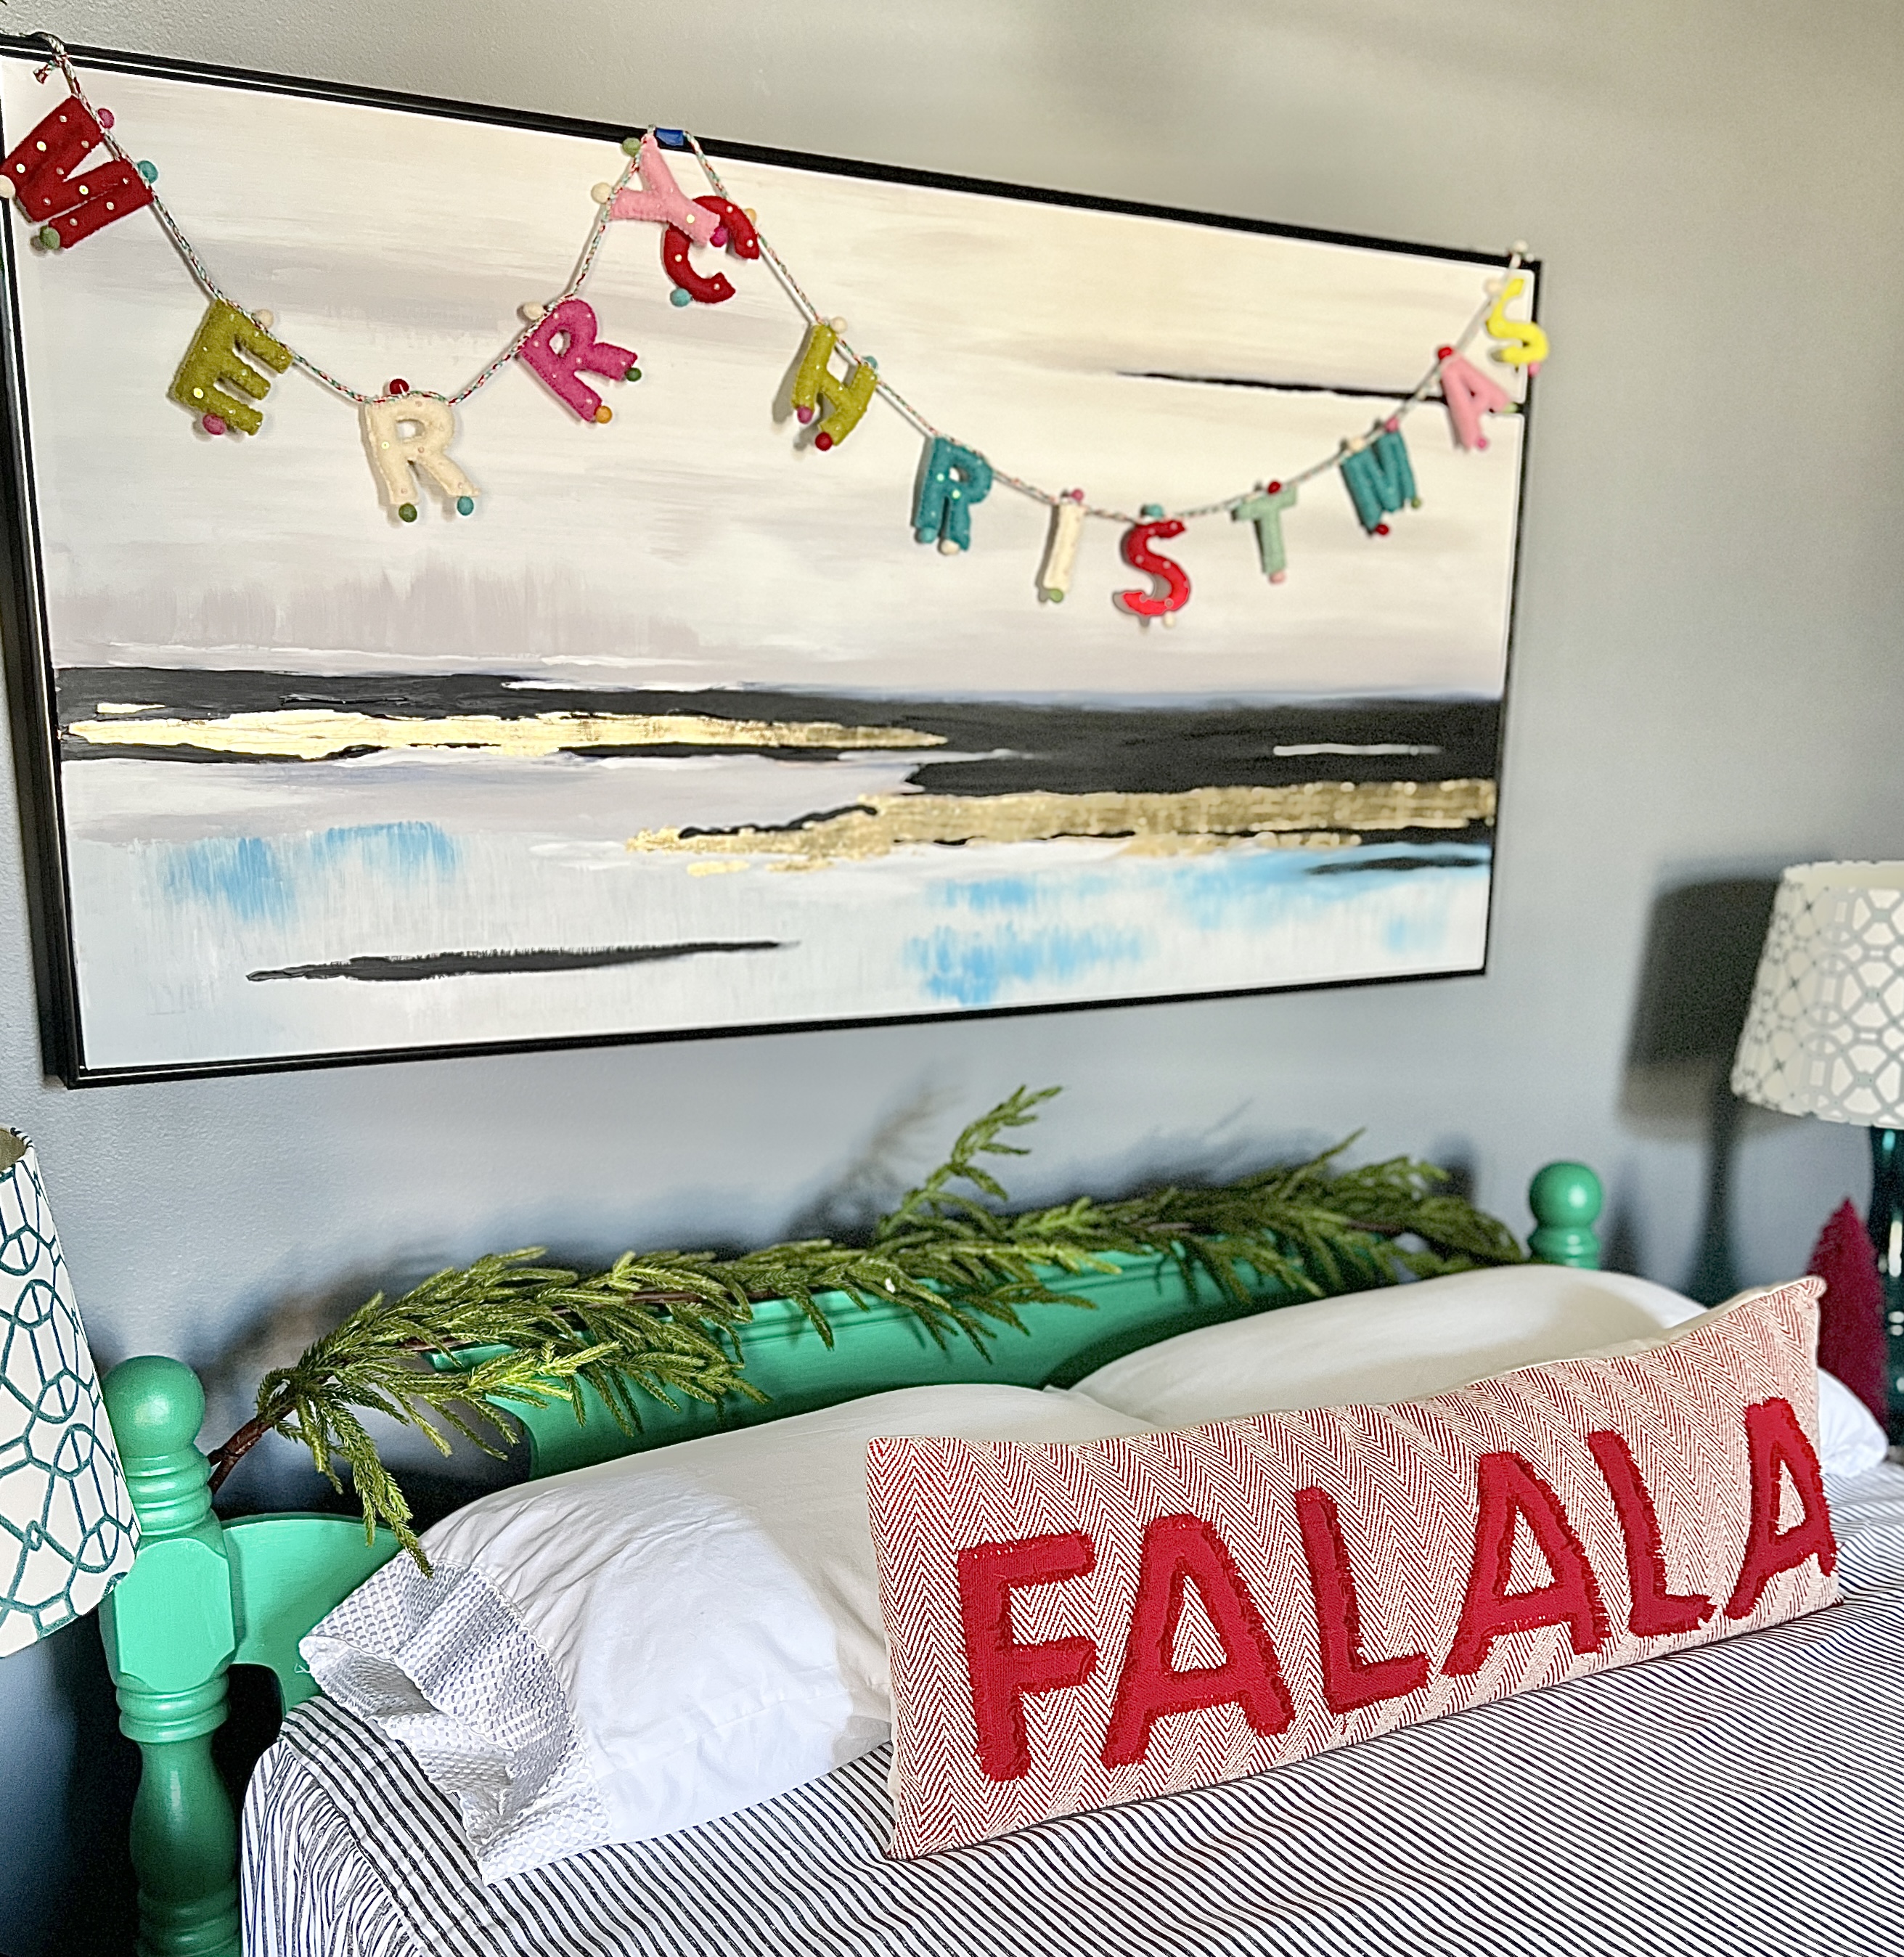 A cheerful "Merry Christmas" message hanging above the painted headboard.